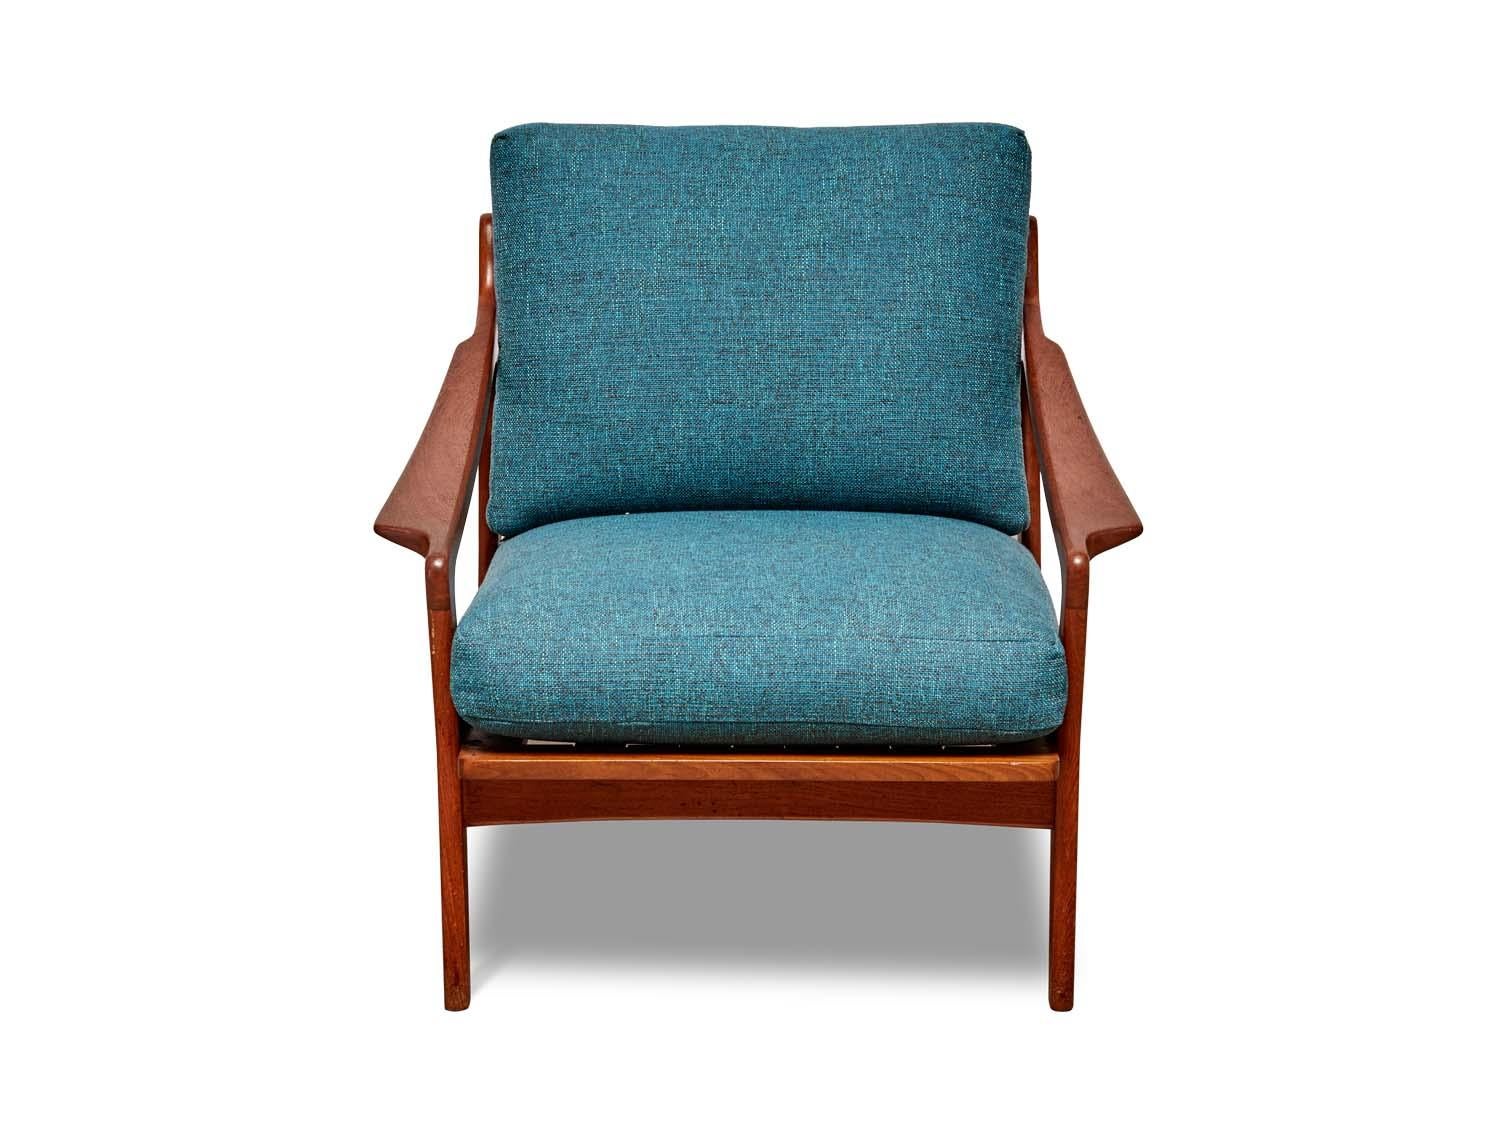 Mid-20th Century Vintage Trak Lounge Chair by Dux of Sweden